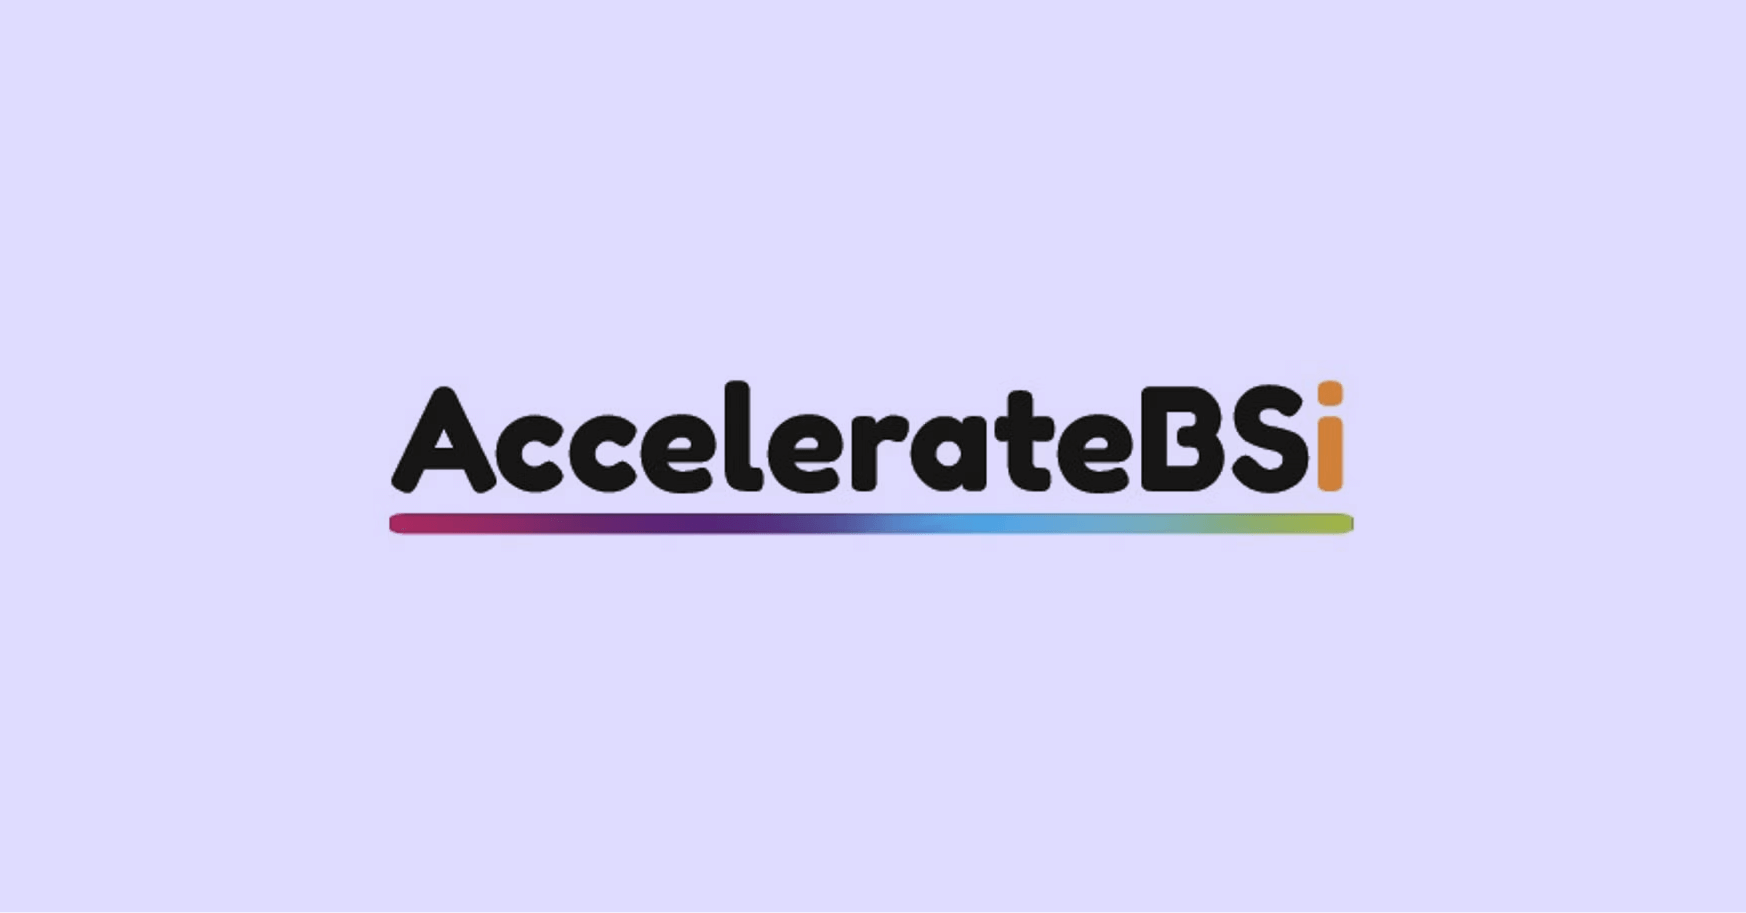 Agency AccelerateBSi logo with background